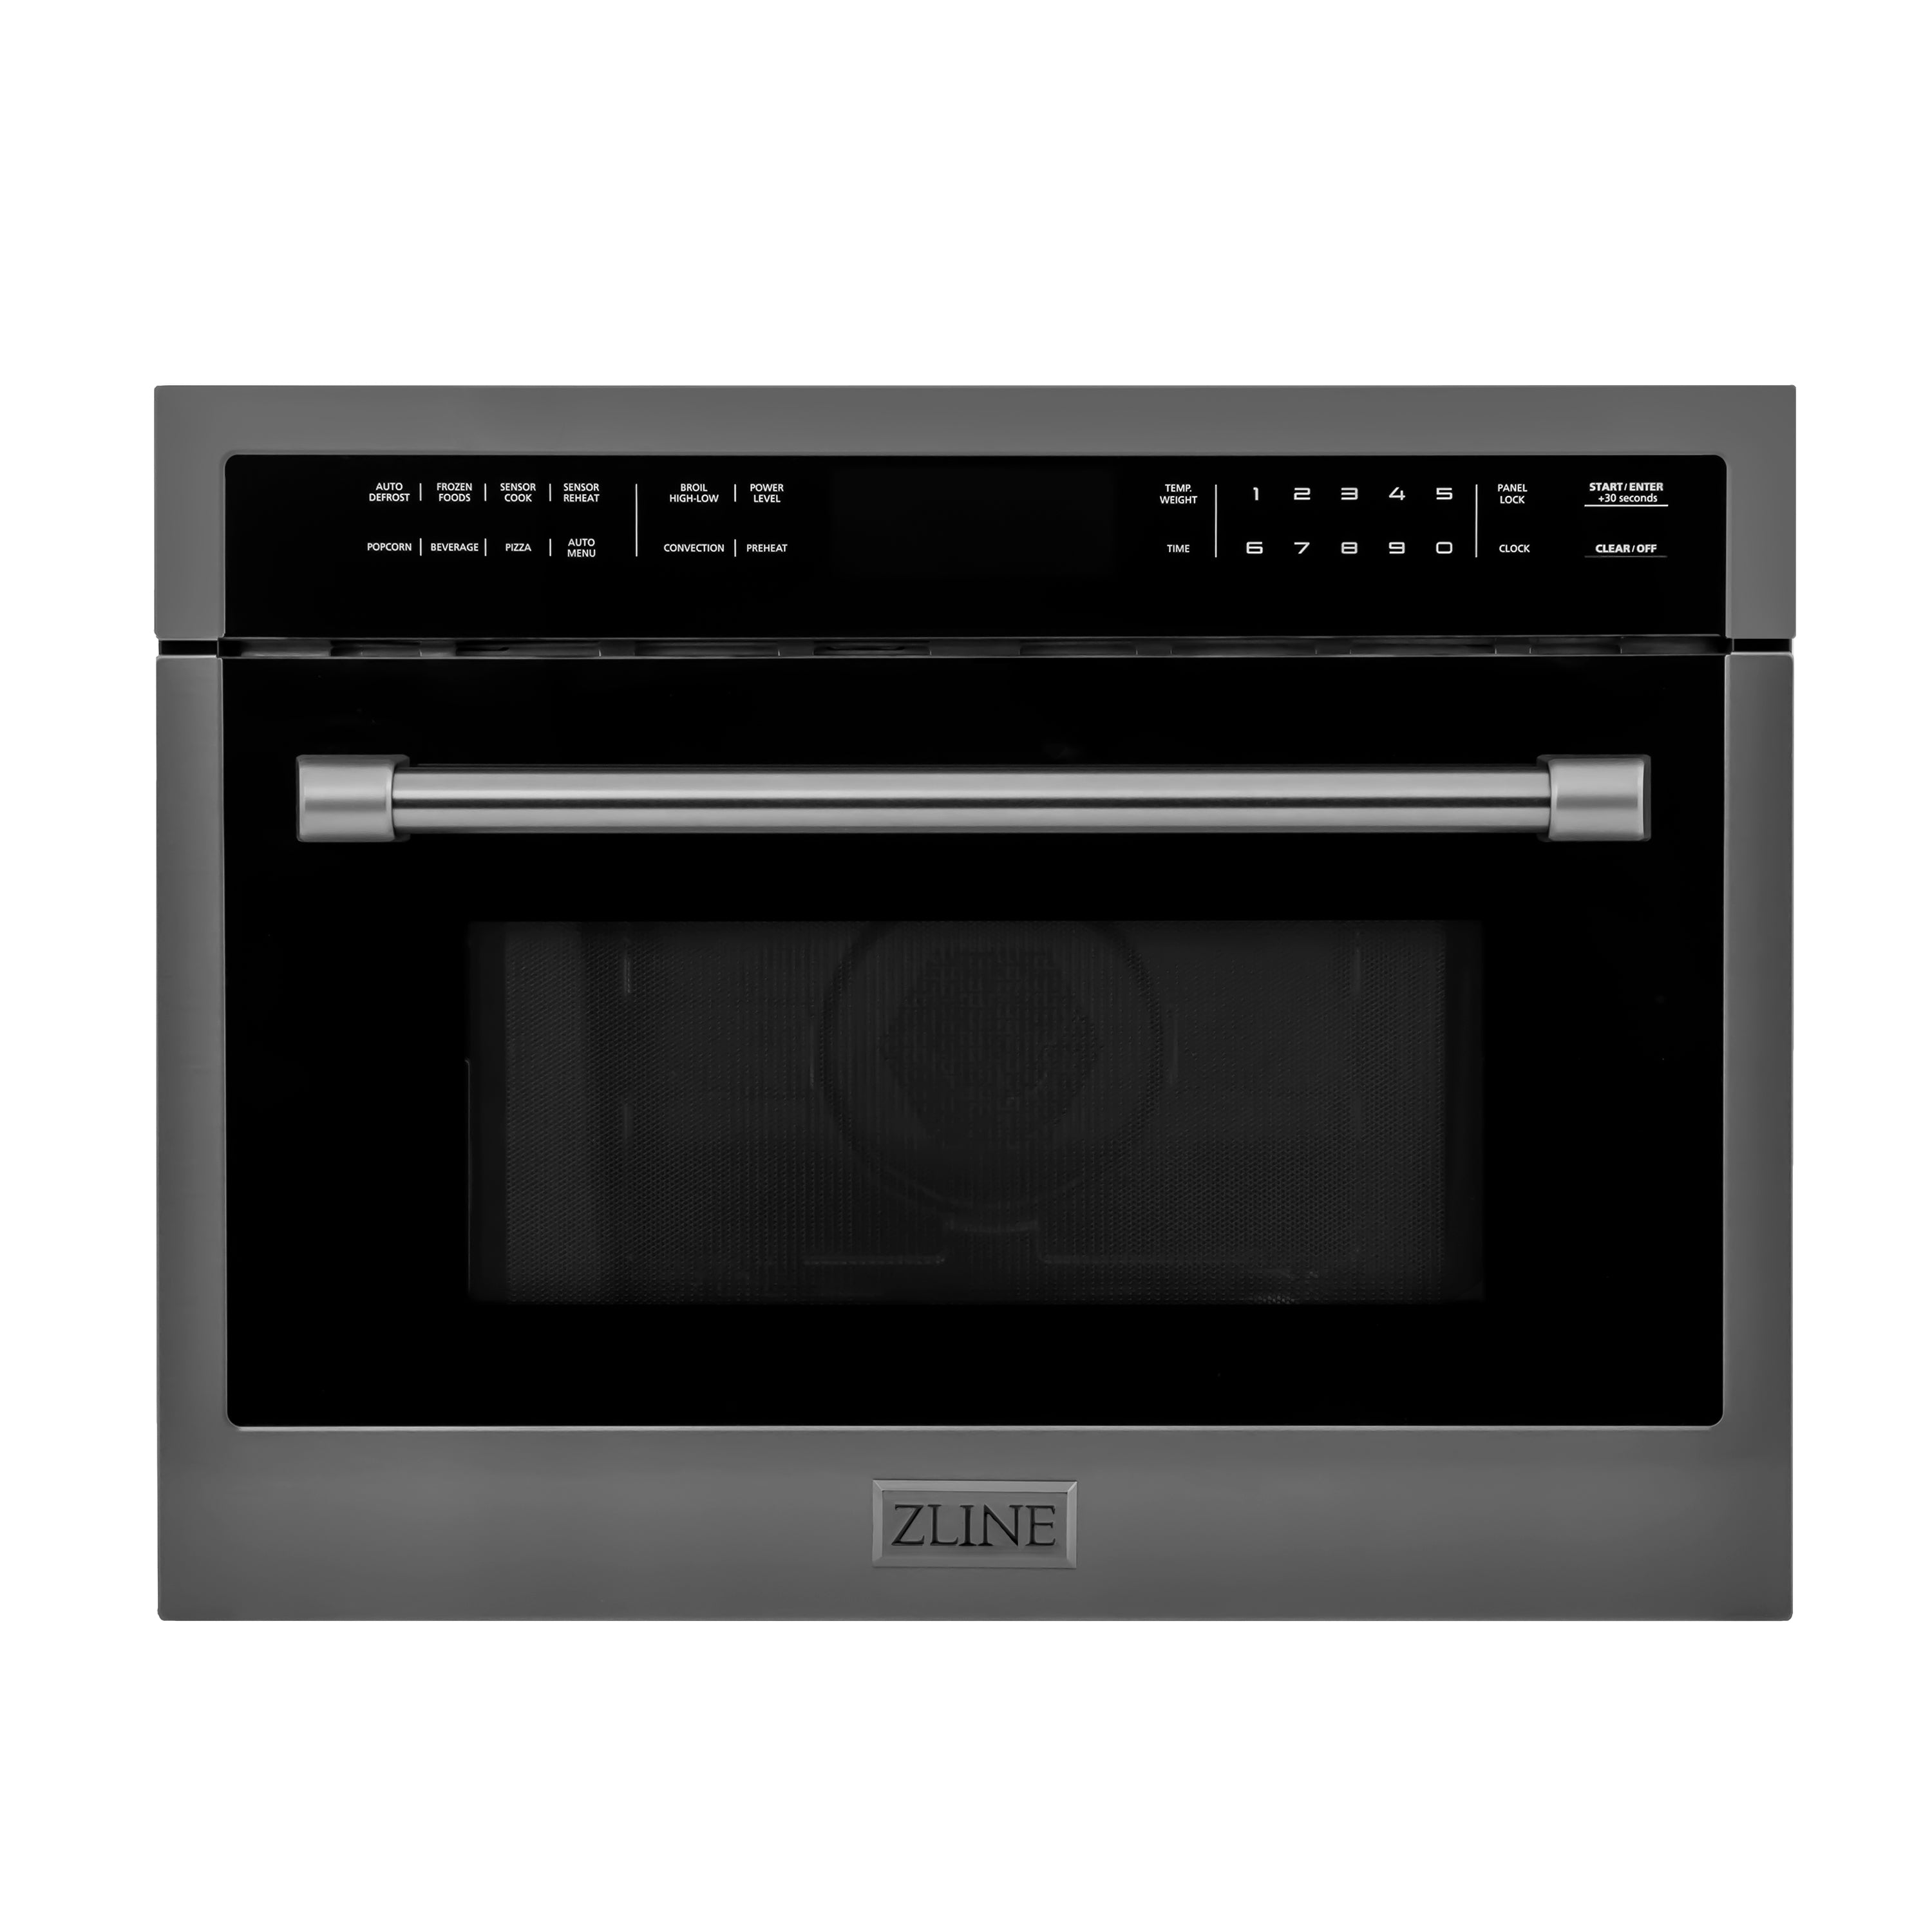 ZLINE 24 in. Black Stainless Steel Built-in Convection Microwave Oven with Speed and Sensor Cooking (MWO-24-BS) Front View Door Closed